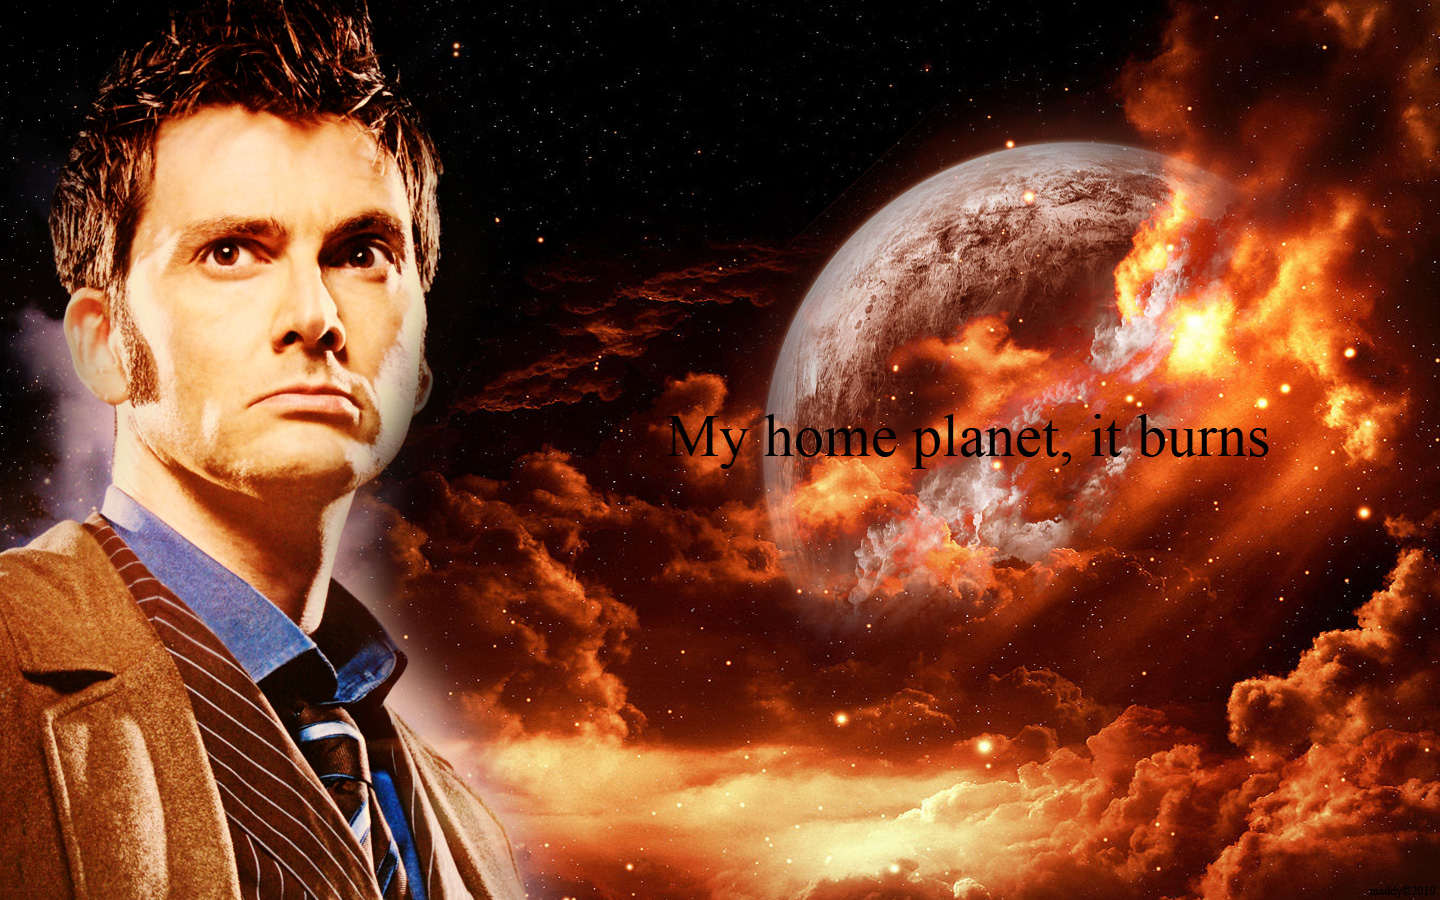 The Tenth Doctor Wallpaper